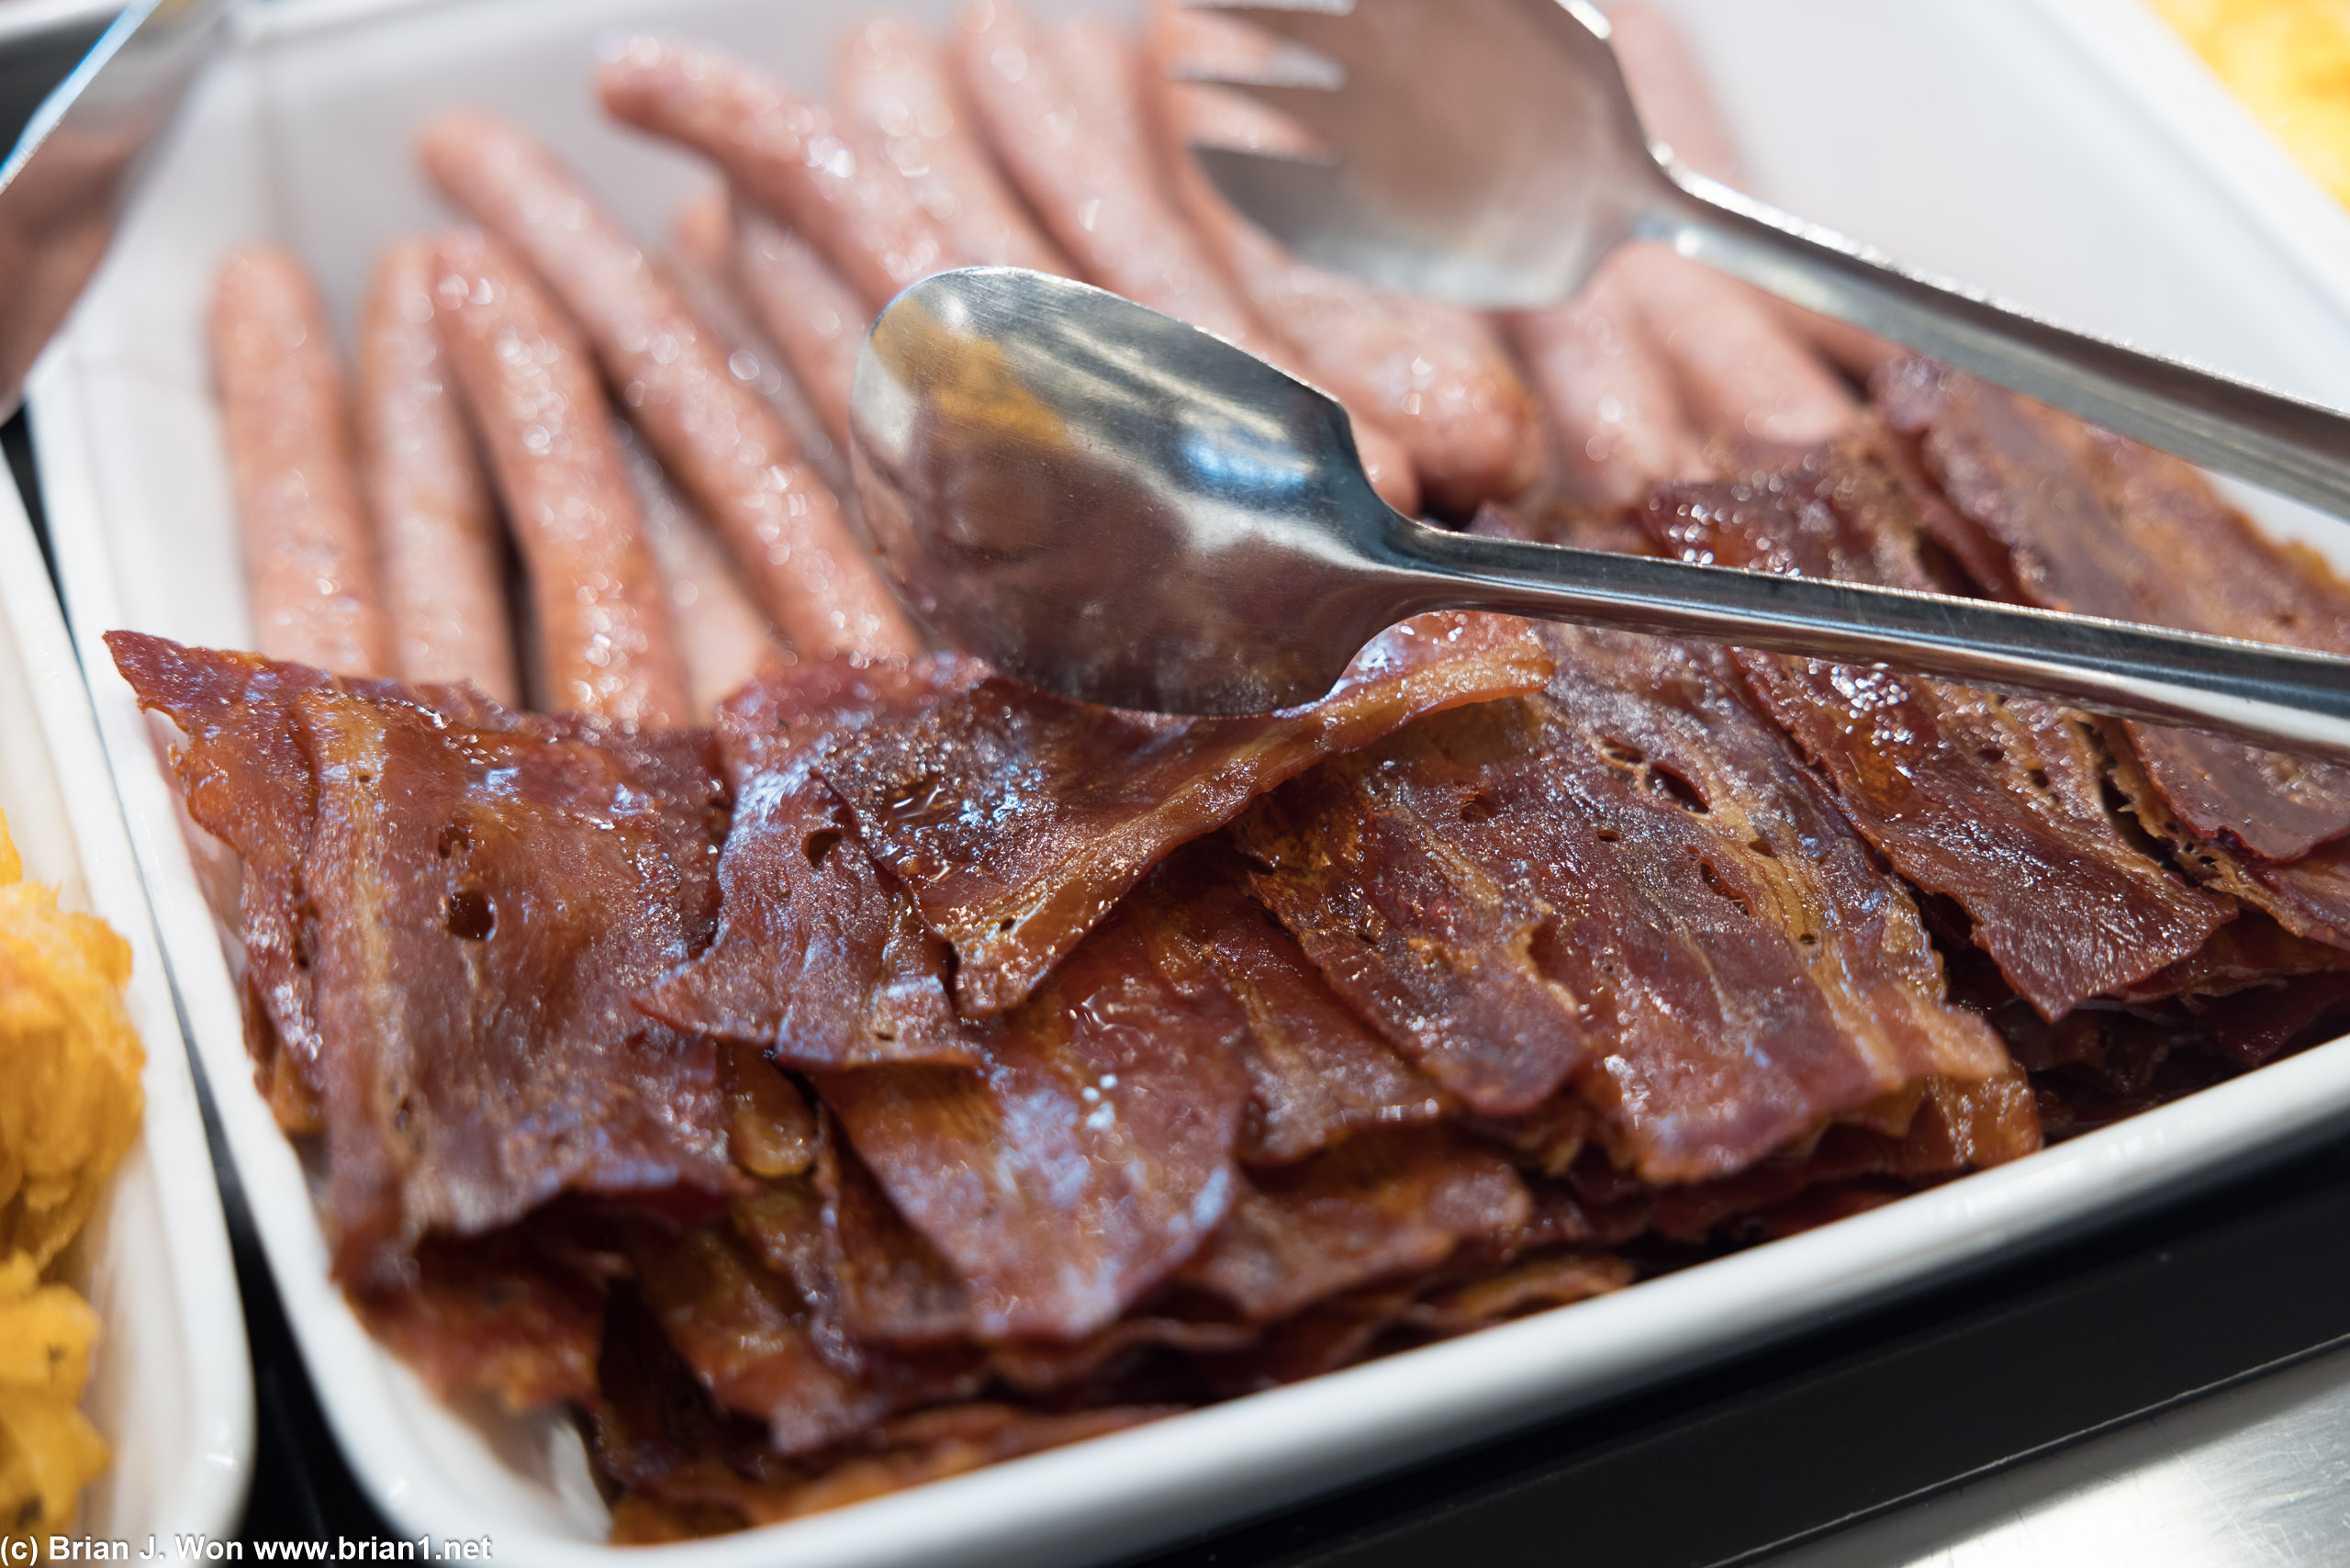 The custom fried-hard bacon that was served daily.